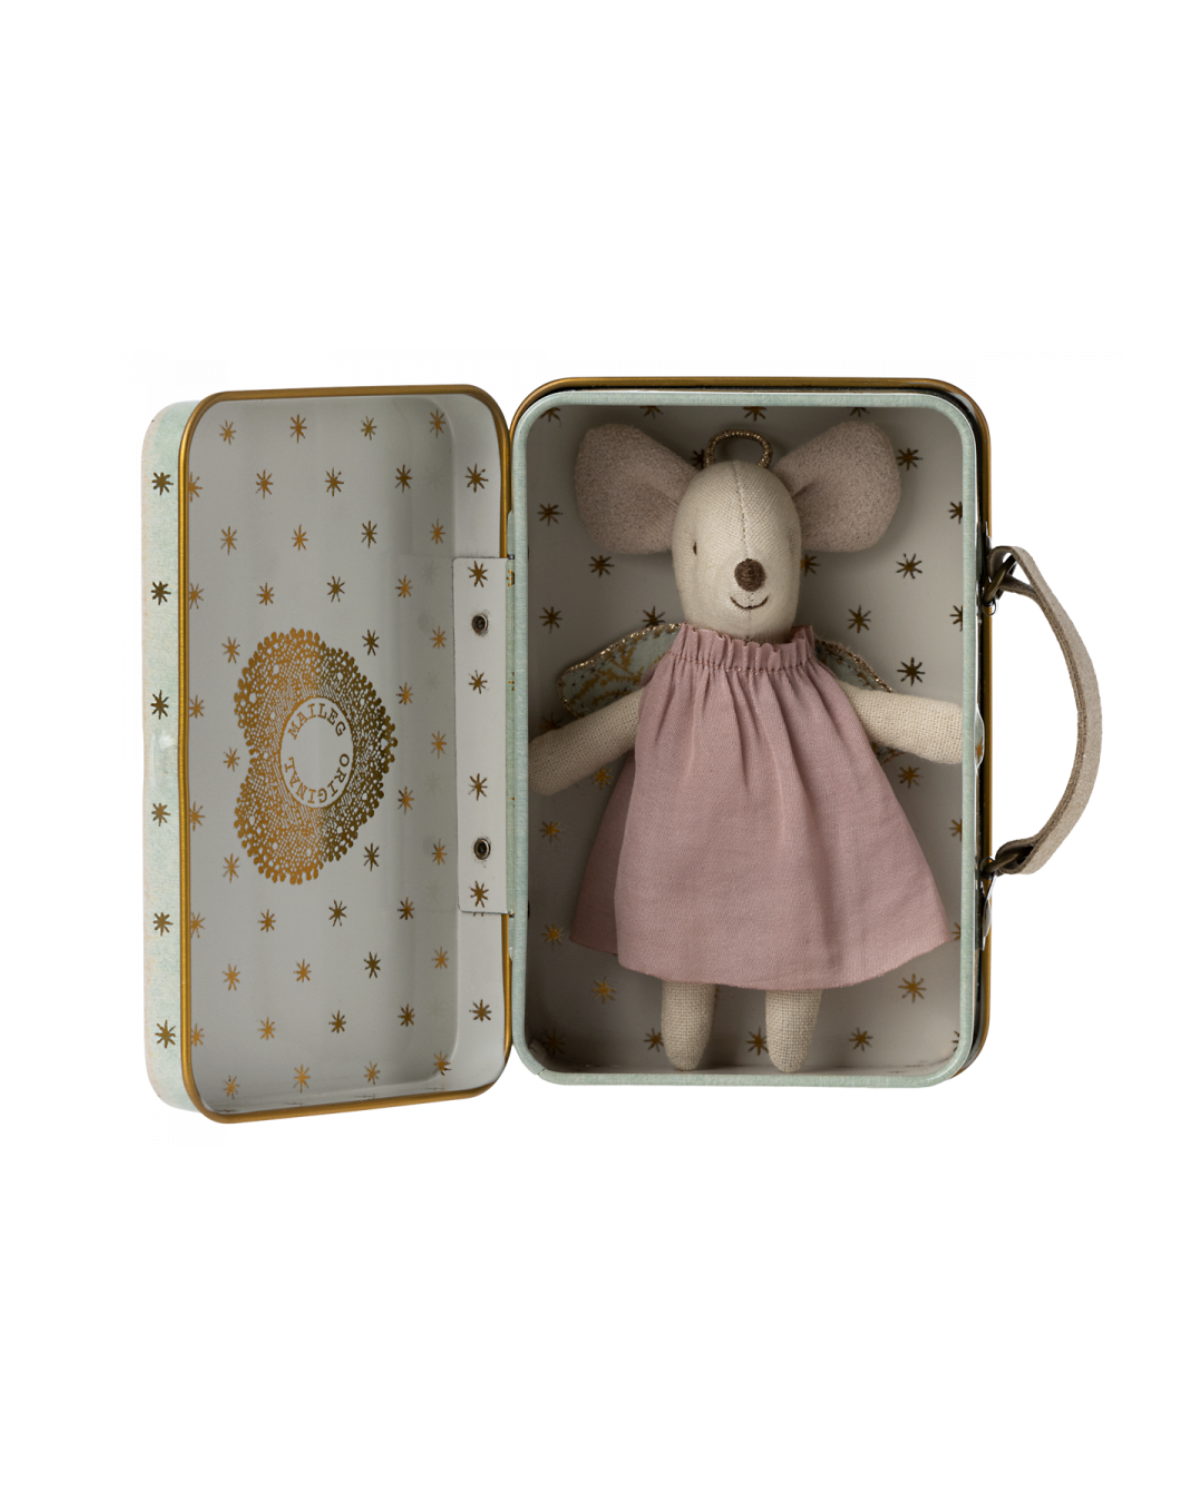 Angel Mouse in Suitcase - Heavenly Maileg Doll for Kids